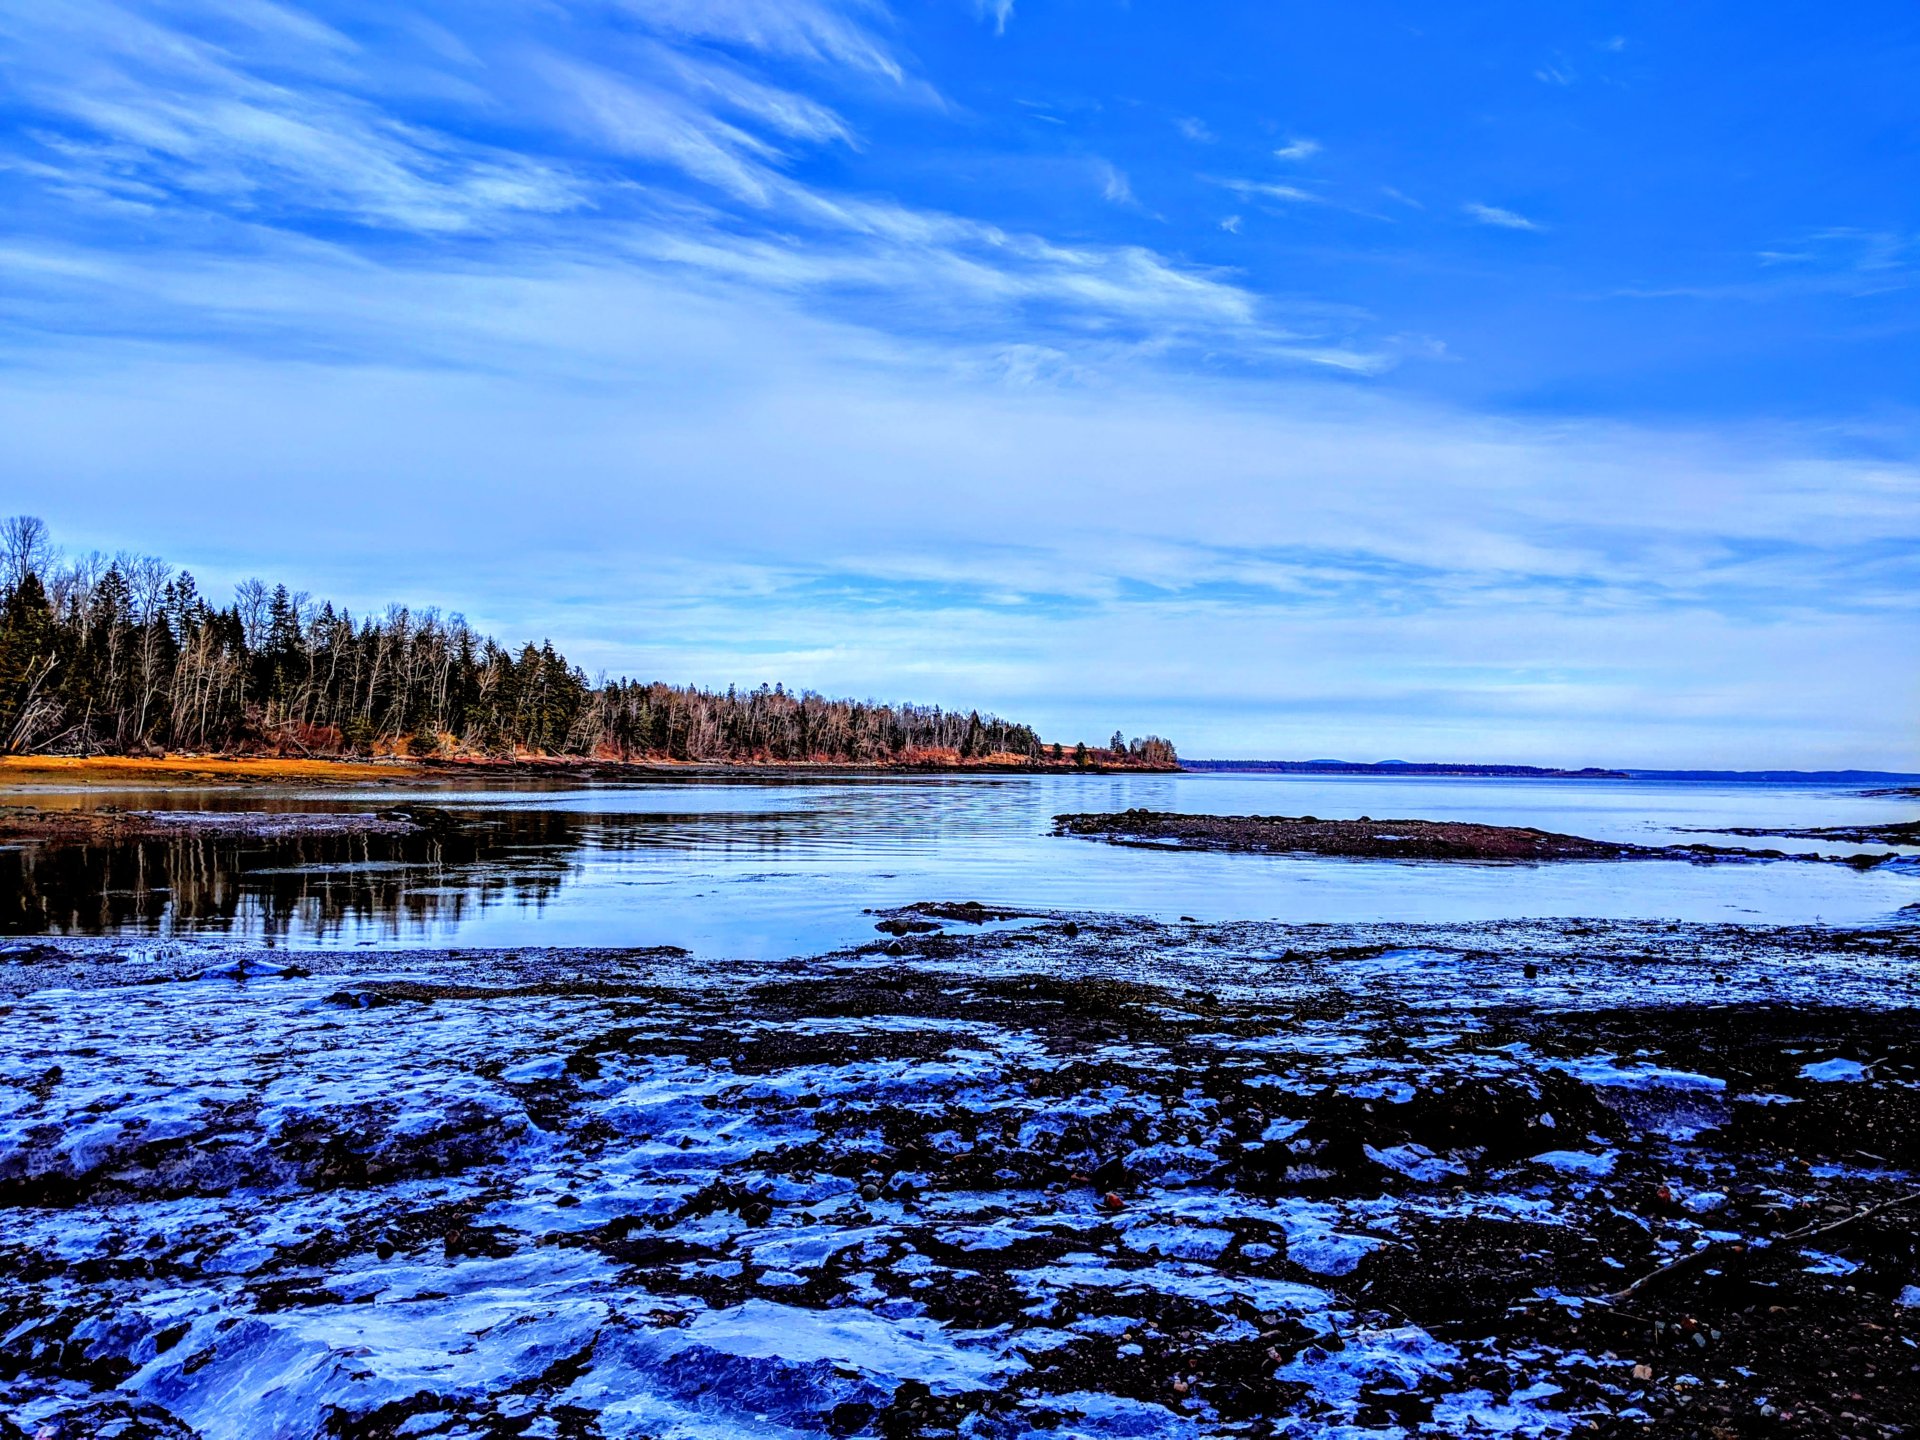 ice on Lewis's cove in Perry, Maine, Dec 2019.